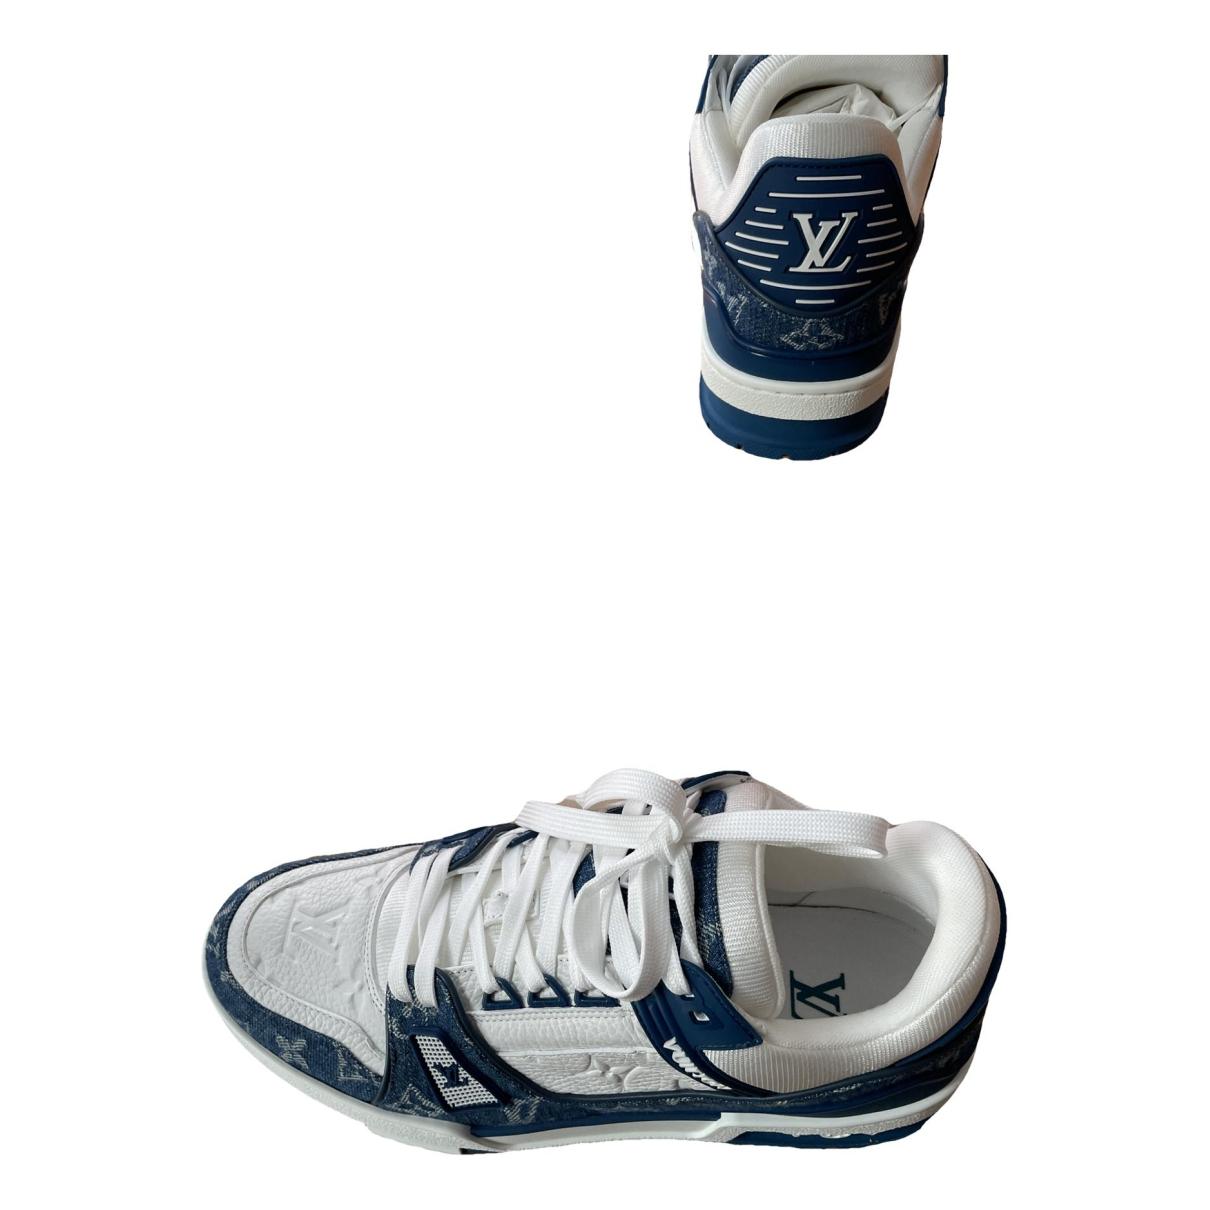 Lv trainer leather high trainers Louis Vuitton White size 6 UK in Leather -  33107559